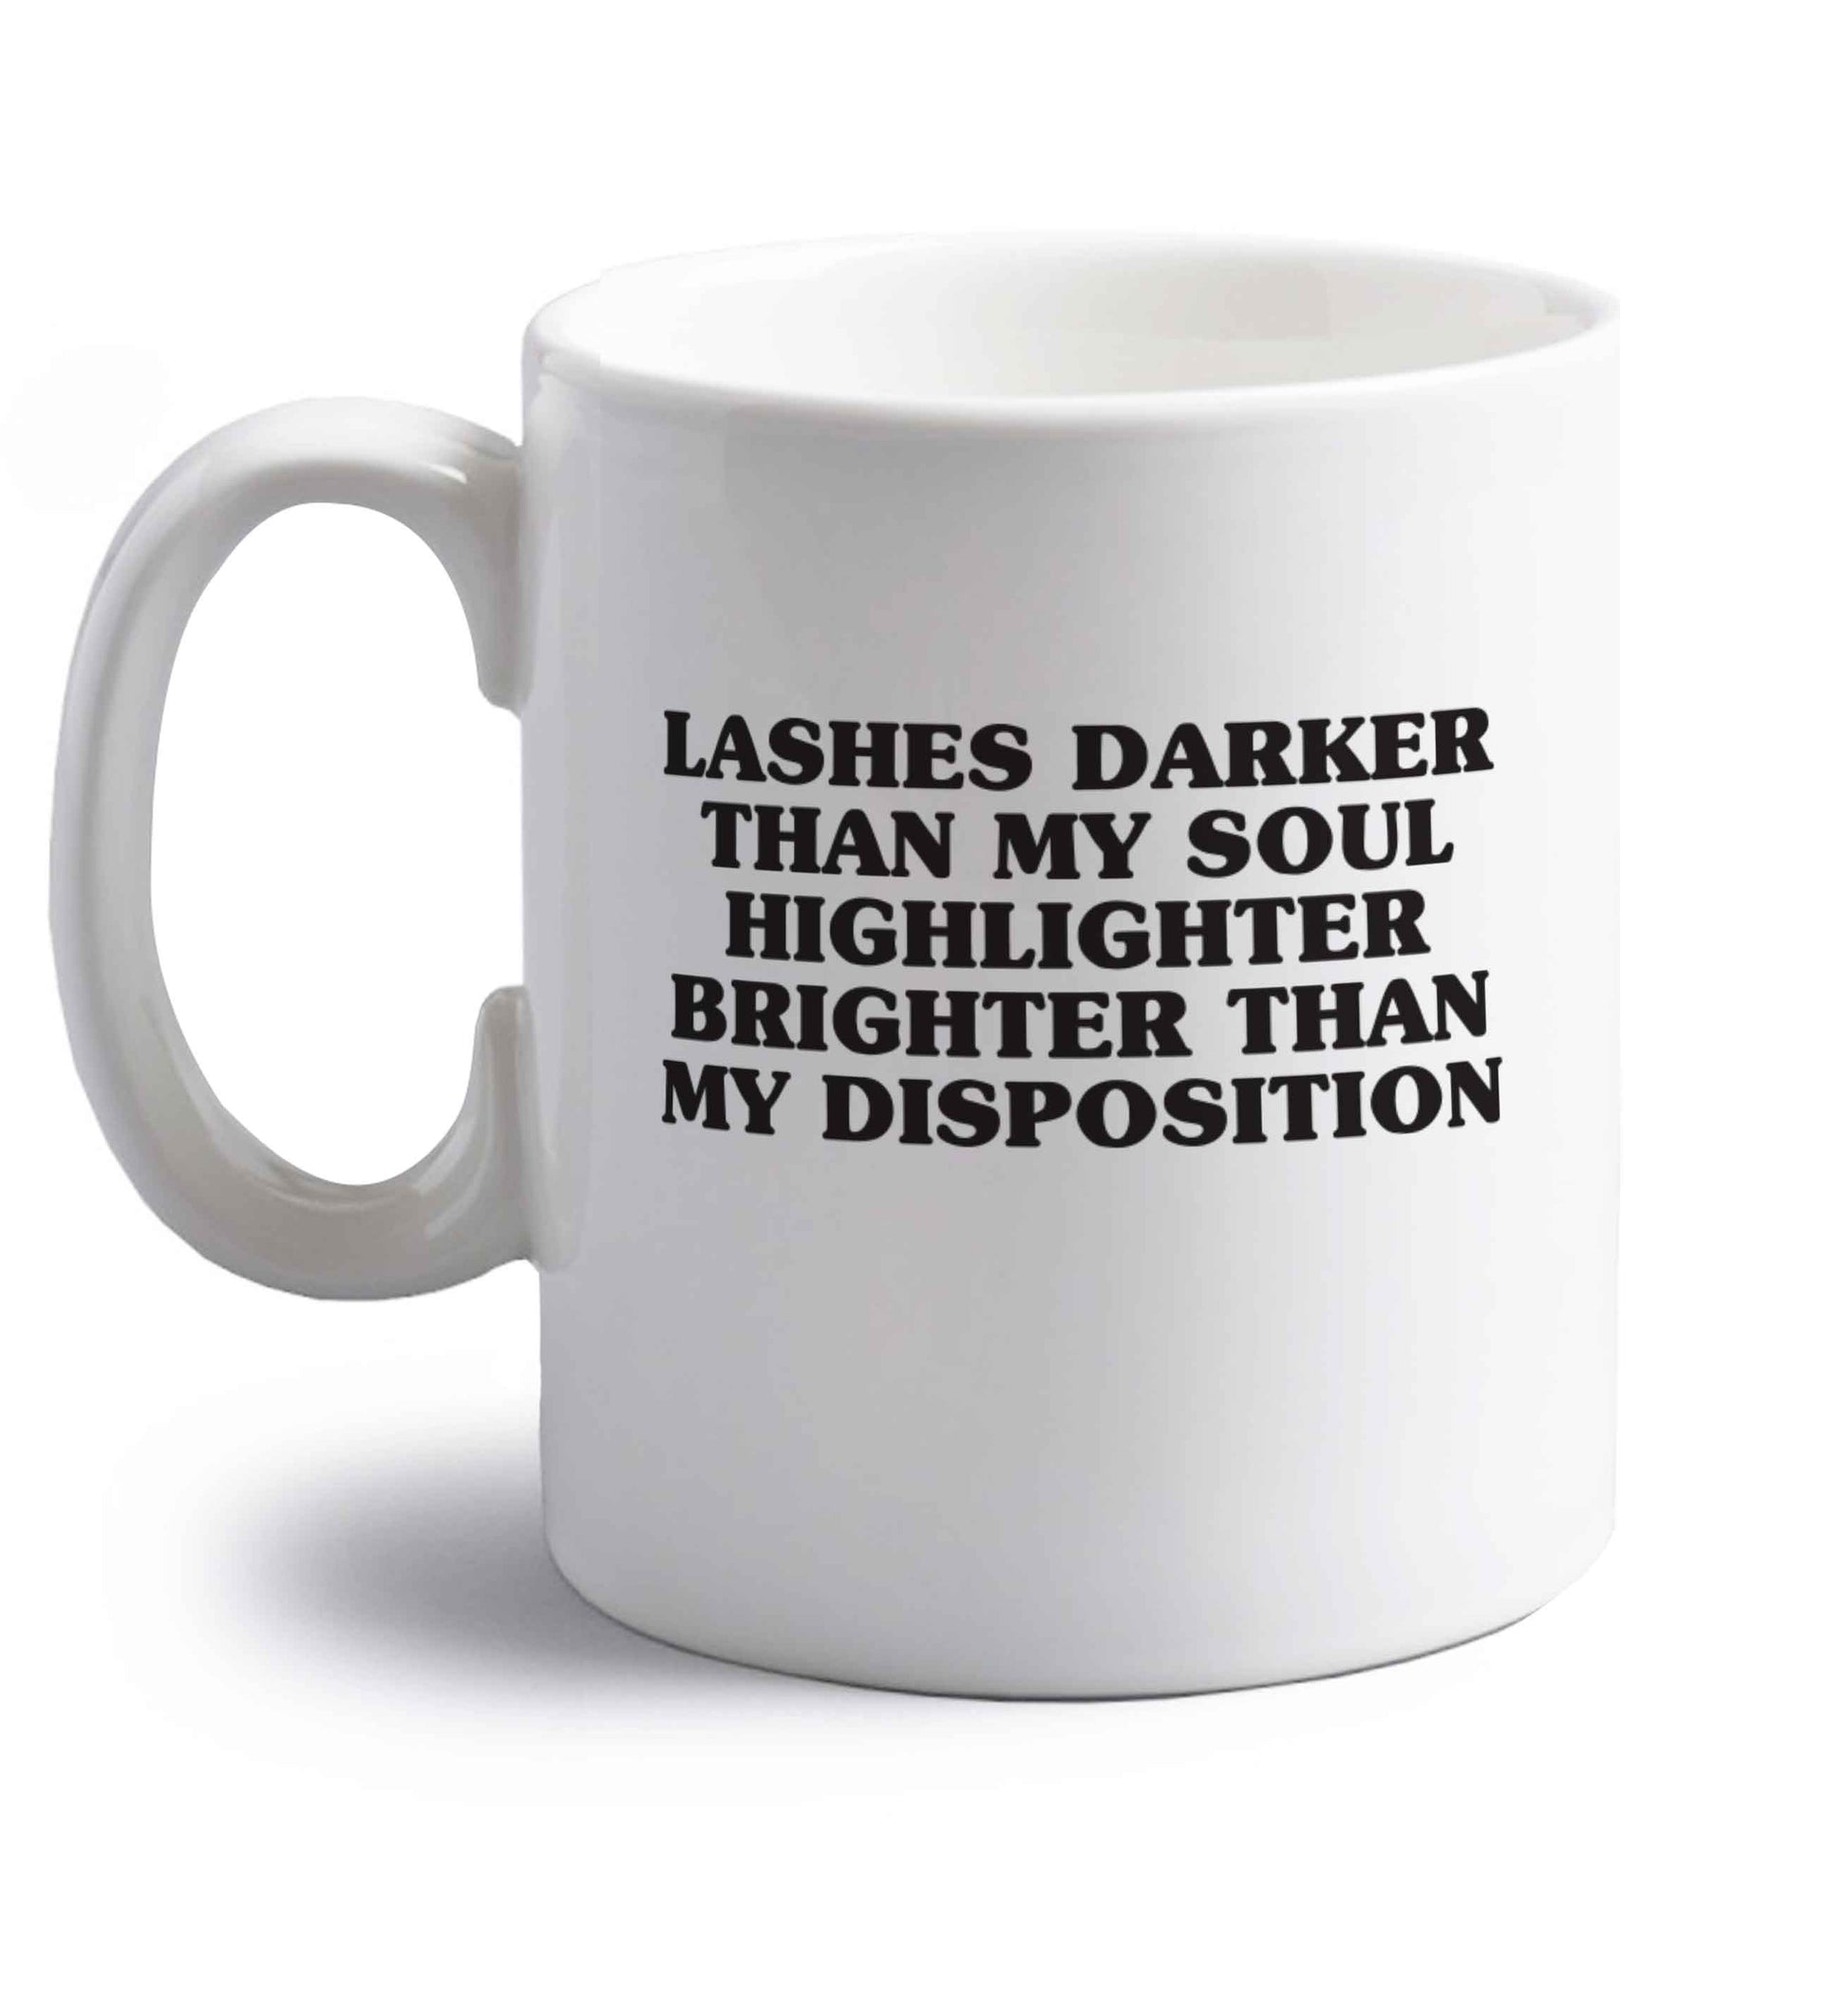 Lashes darker than my soul, highlighter brighter than my disposition right handed white ceramic mug 